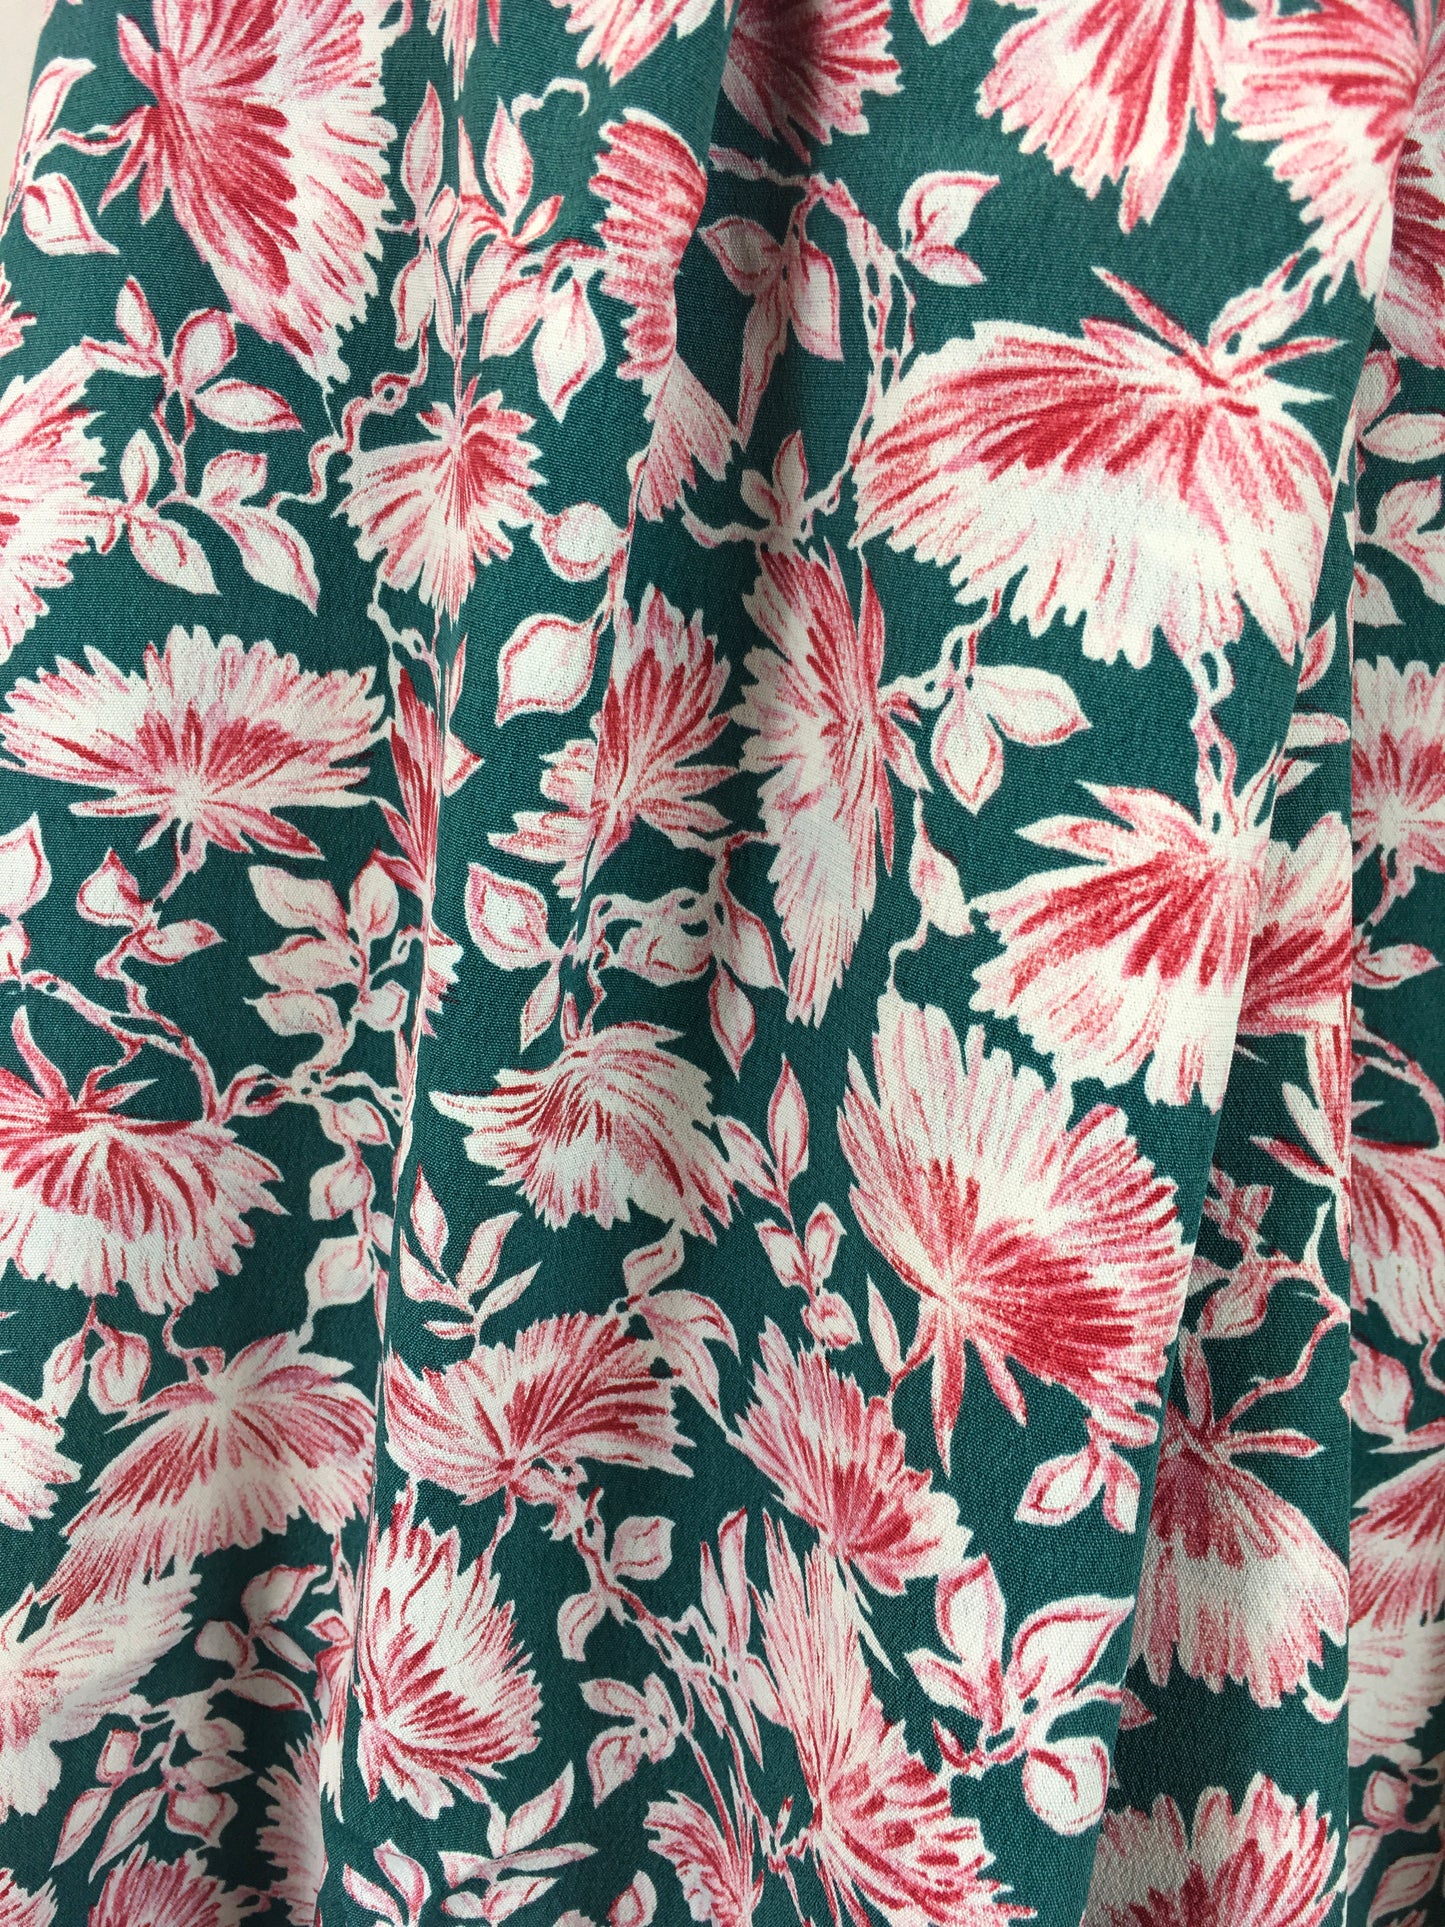 Original 1940’s Rayon Crepe Fabric - In A Jade Green and Deep Wine Floral 1.2 Metres